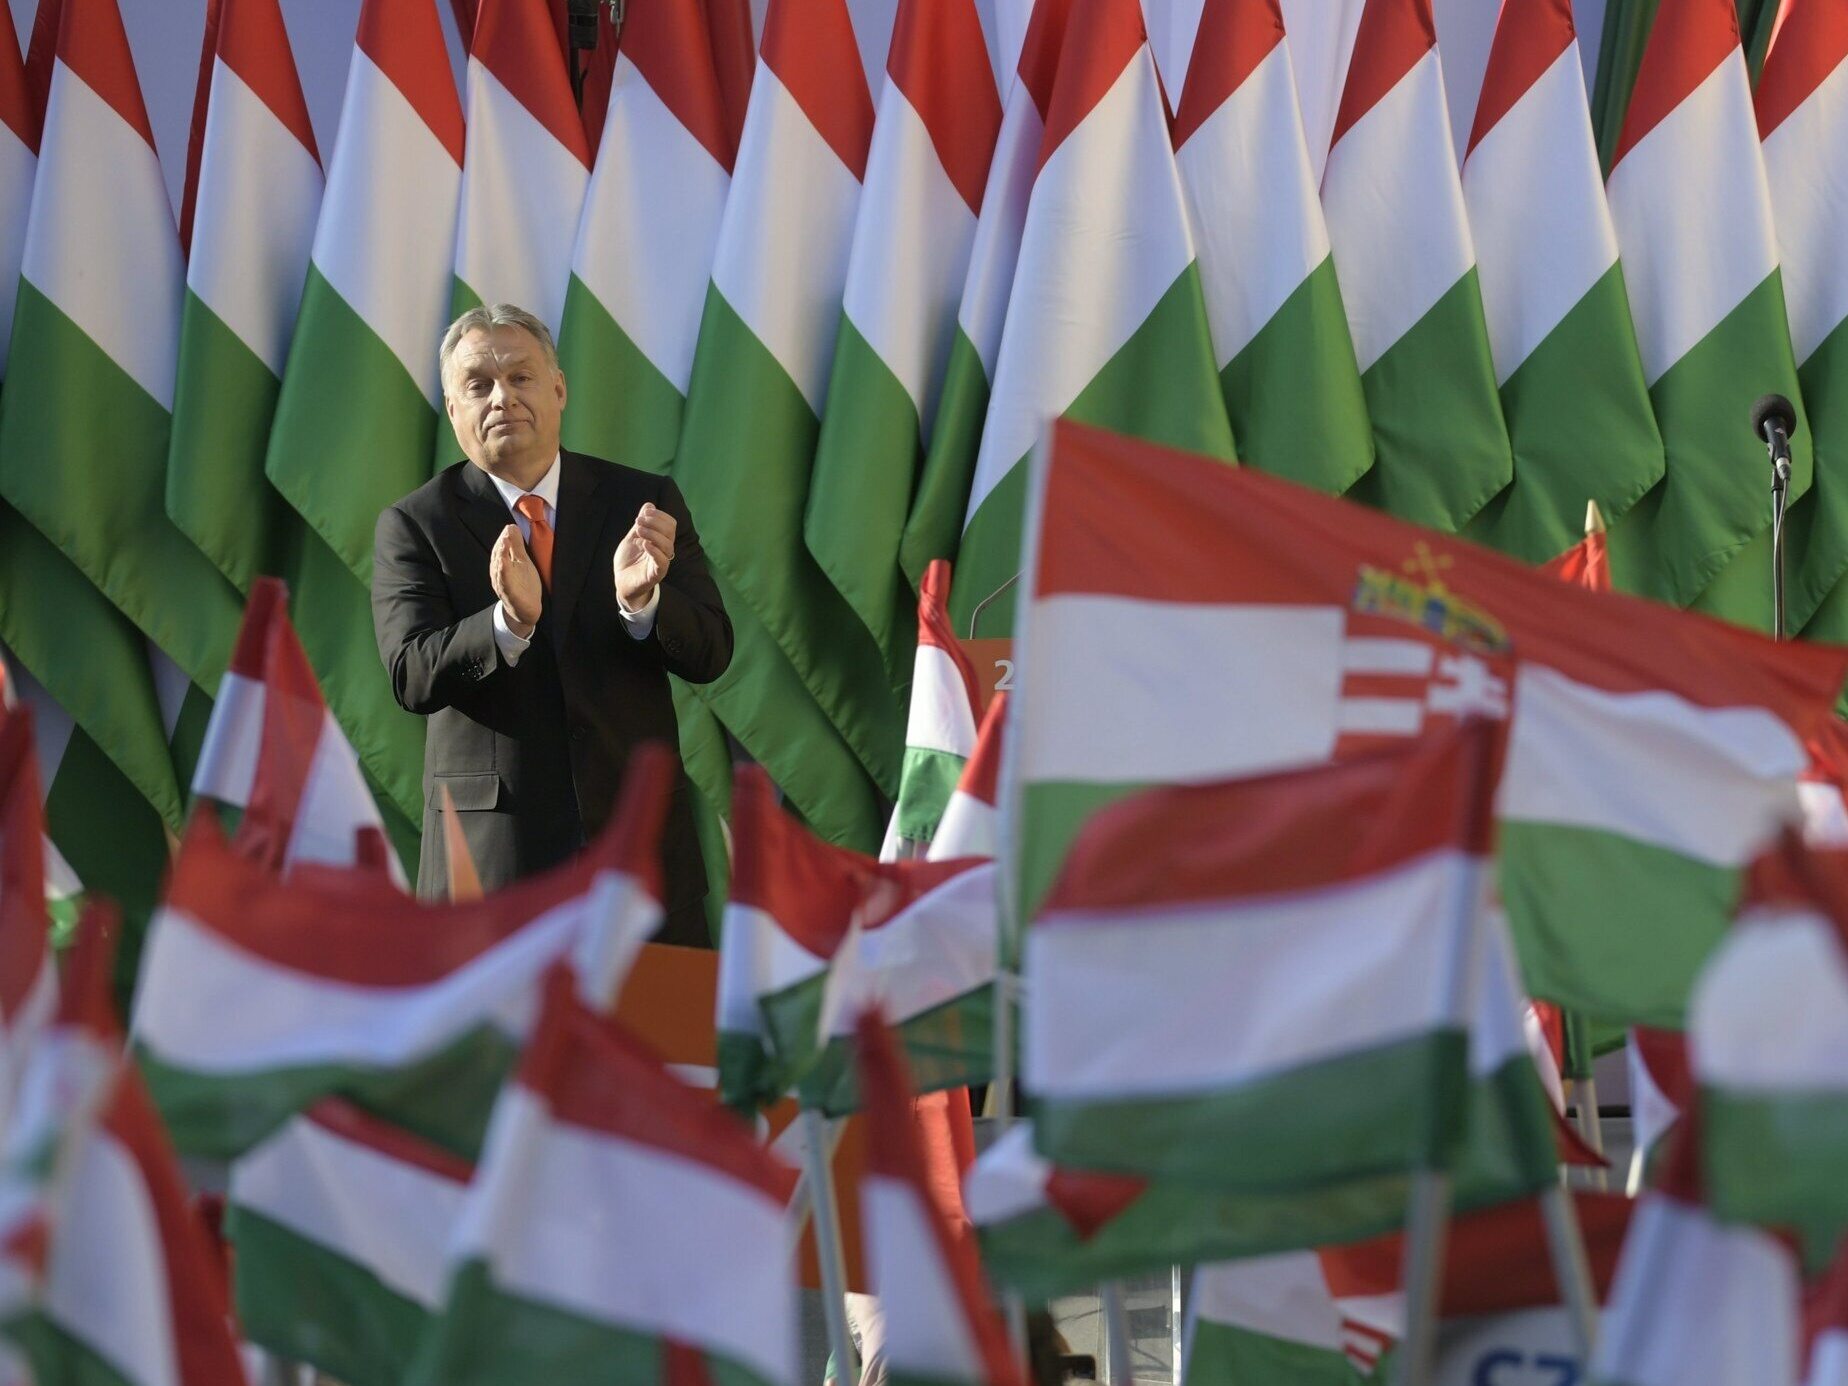 The Hungarians refuse to integrate Ukraine into the European Union and NATO